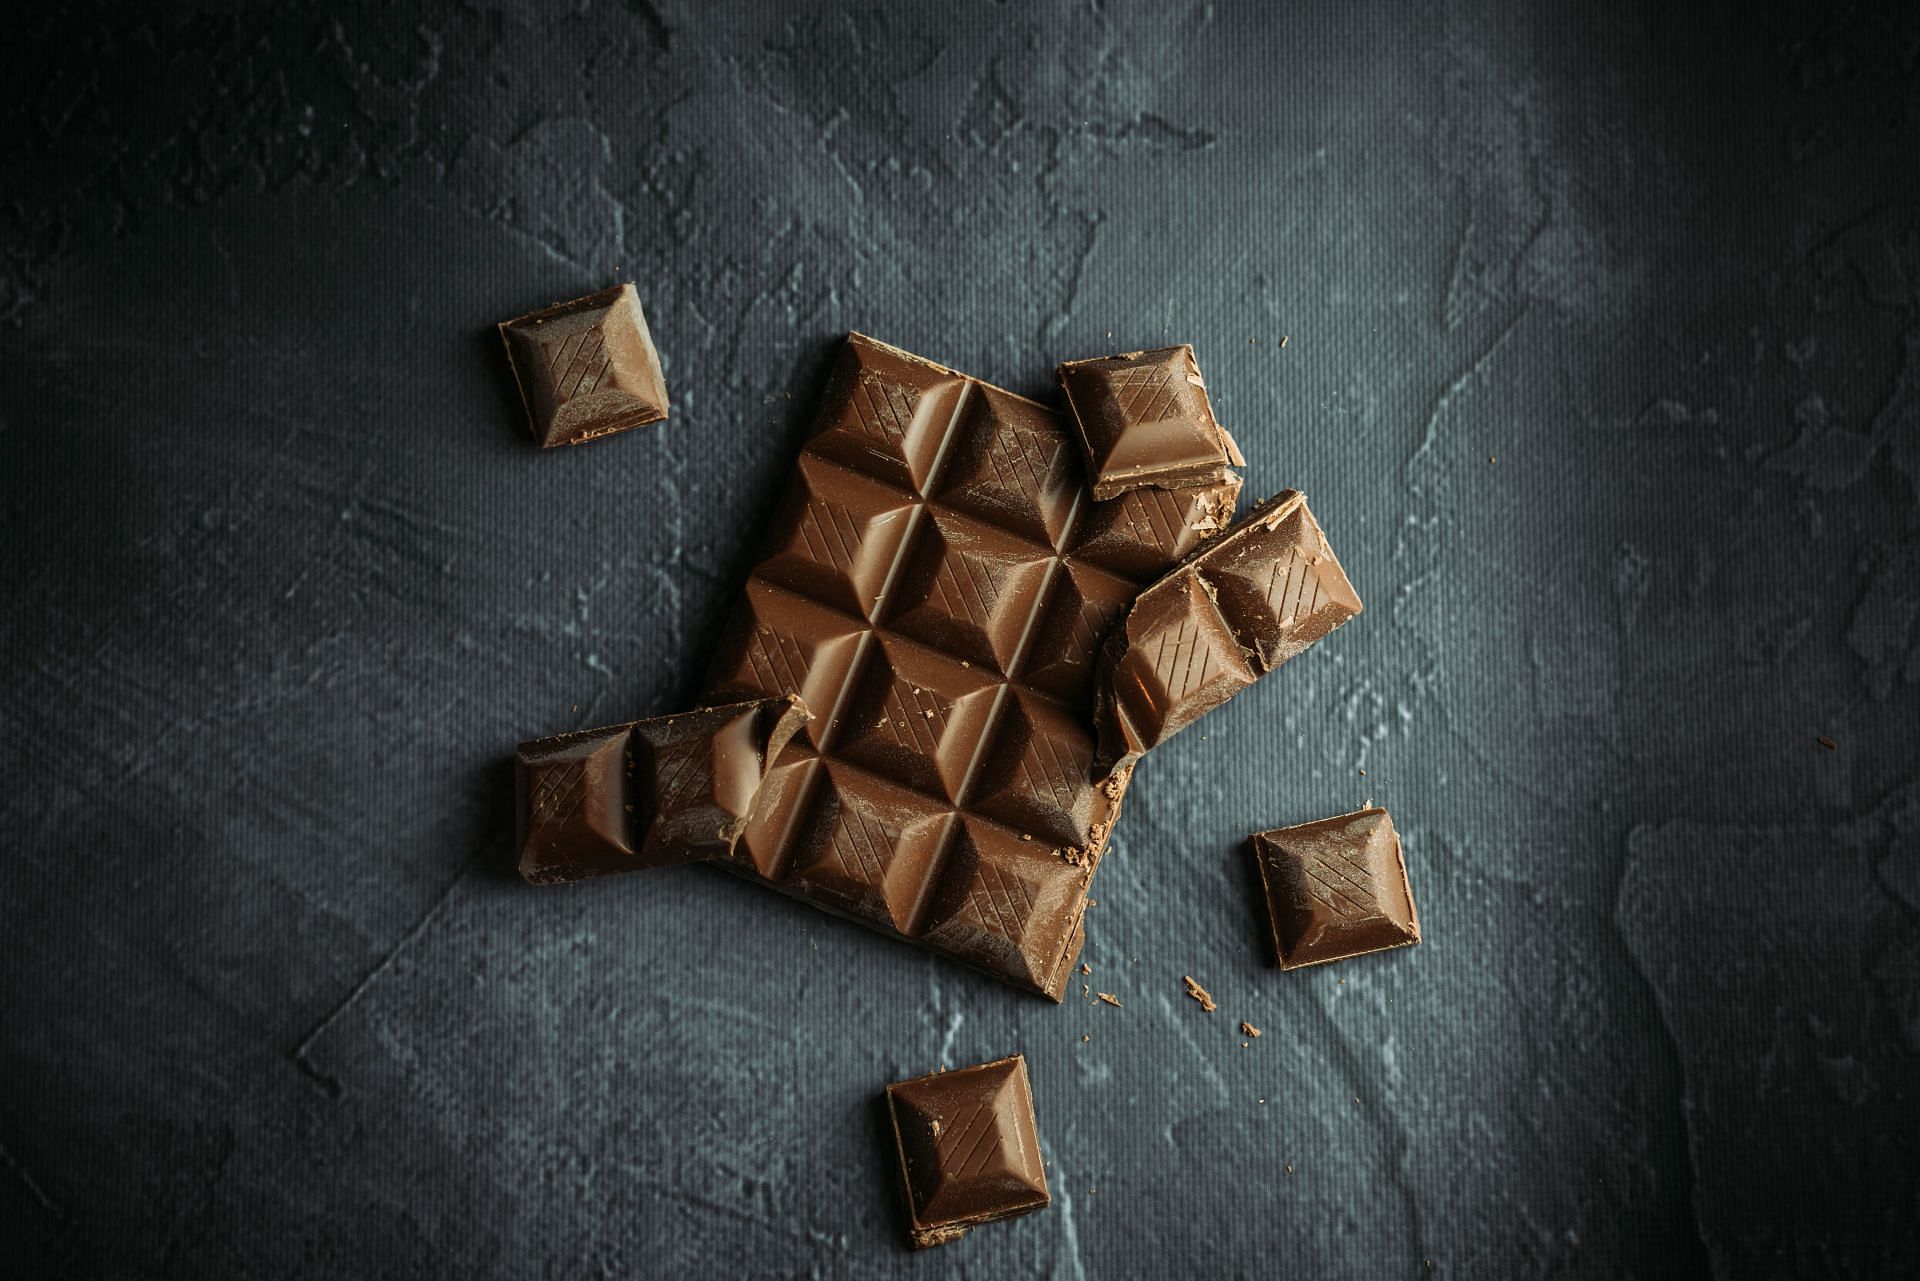 Dark chocolate can be an excellent food sources of magnesium. (Image via Unsplash/Tamas Pap)